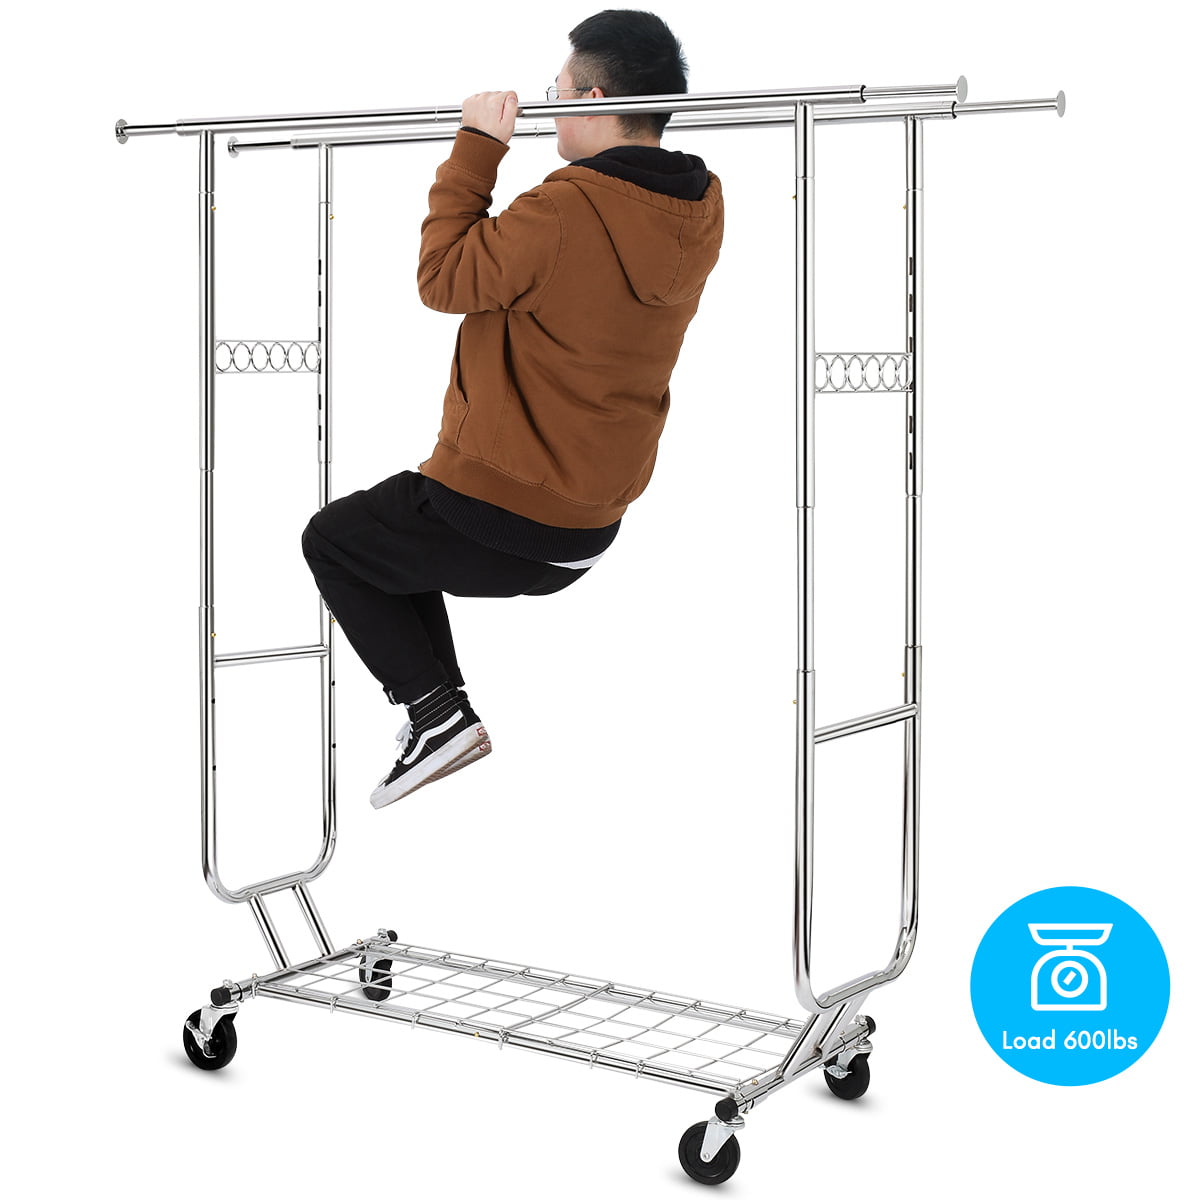 Double Clothing Garment Rack with Shelves Capacity 600 lbs Clothing